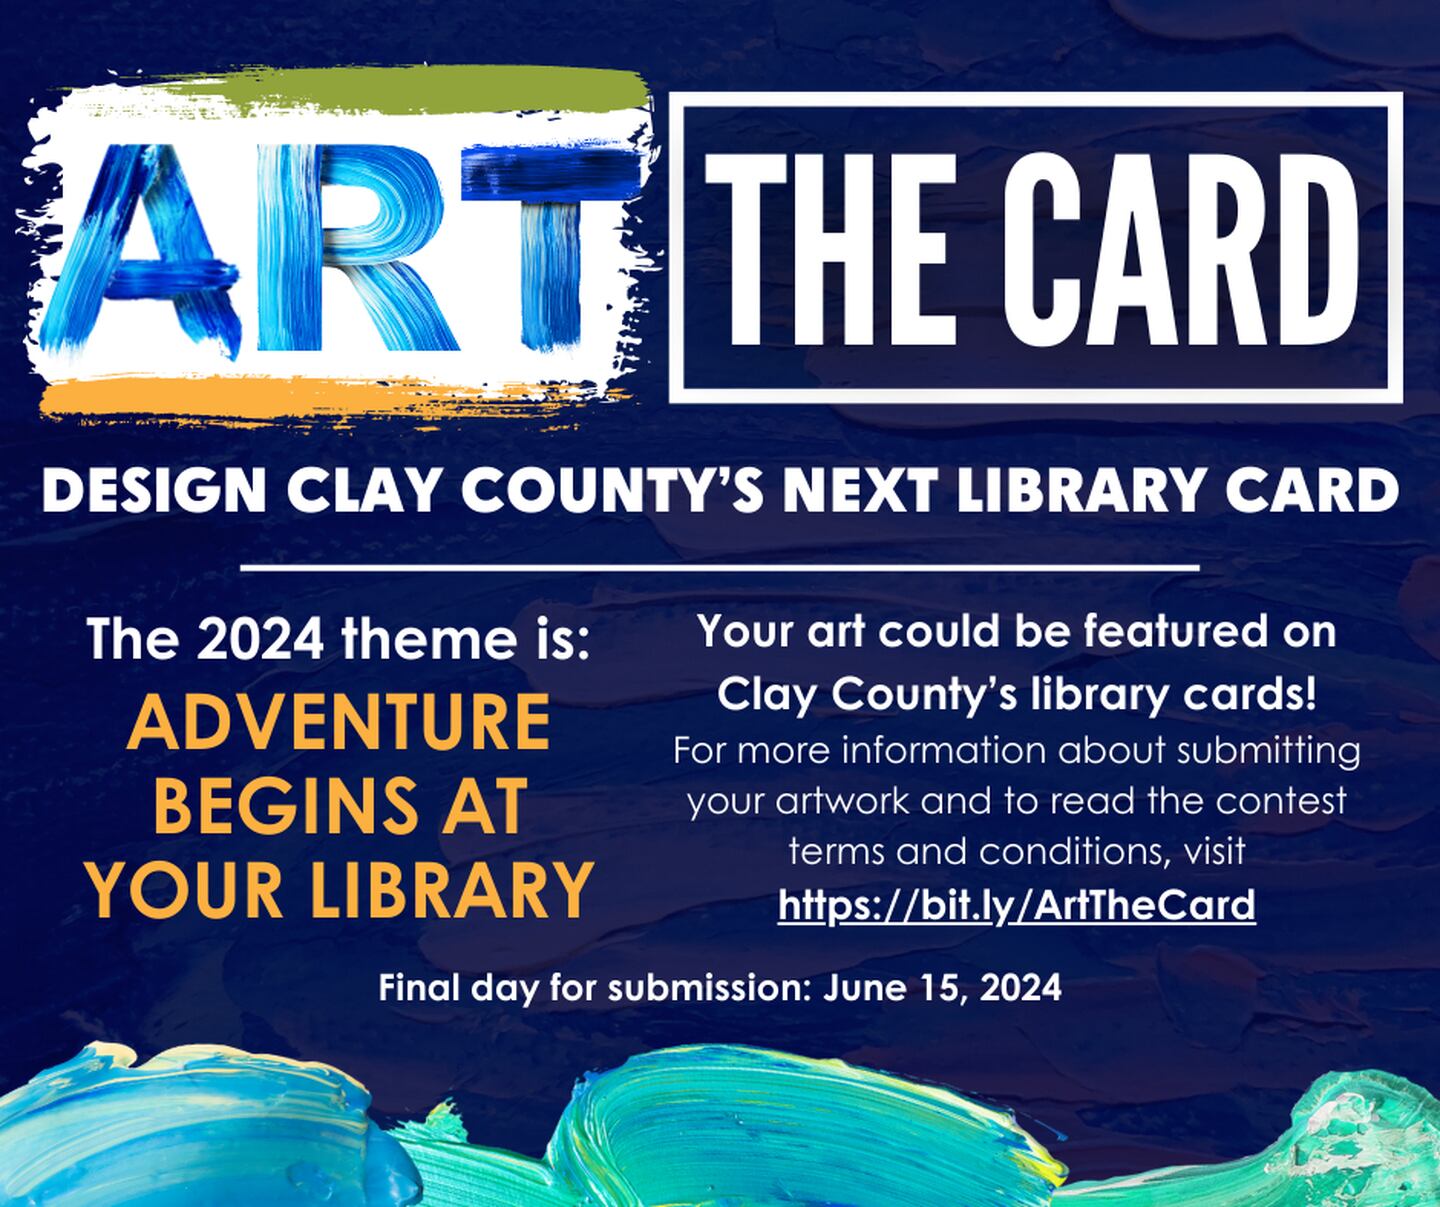 Between the dates of May 15, 2024 and June 15, 2024, the Clay County Public Library System will hold an art contest seeking artwork for special, limited-edition library cards for Library Card Sign-Up Month in September 2024.